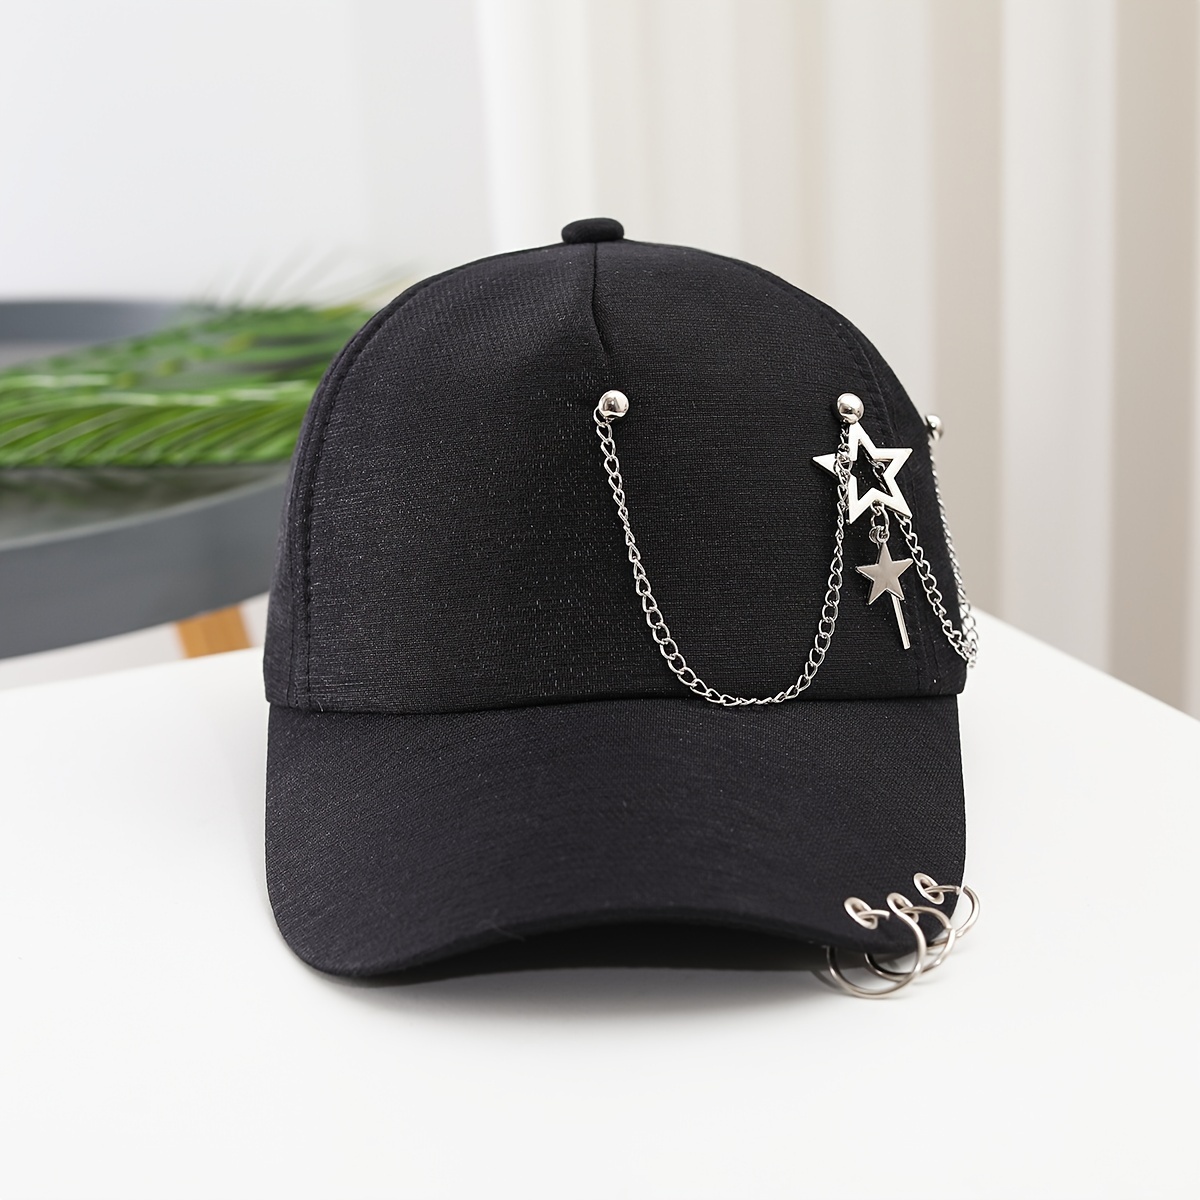 

Women's Baseball Cap With Star Pendant, Casual Adjustable Sun Hat With Chain Accents, Versatile Outdoor Headwear Gifts For Eid